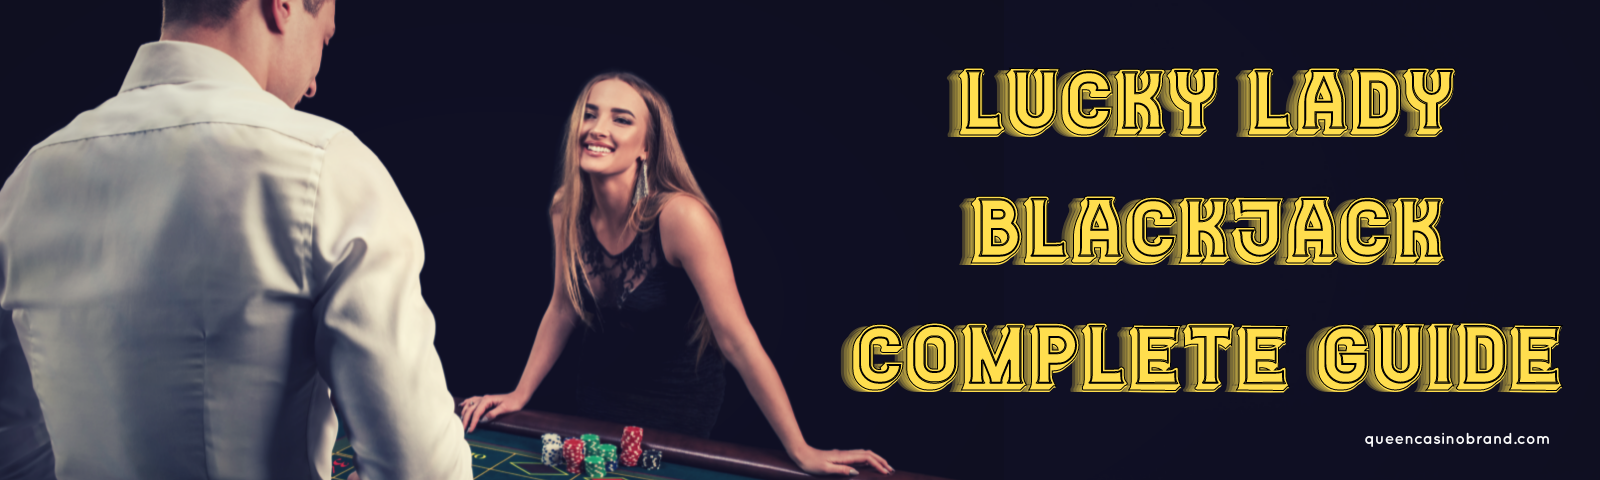 Lucky Lady Blackjack Complete Guide | Queen Casino Brand